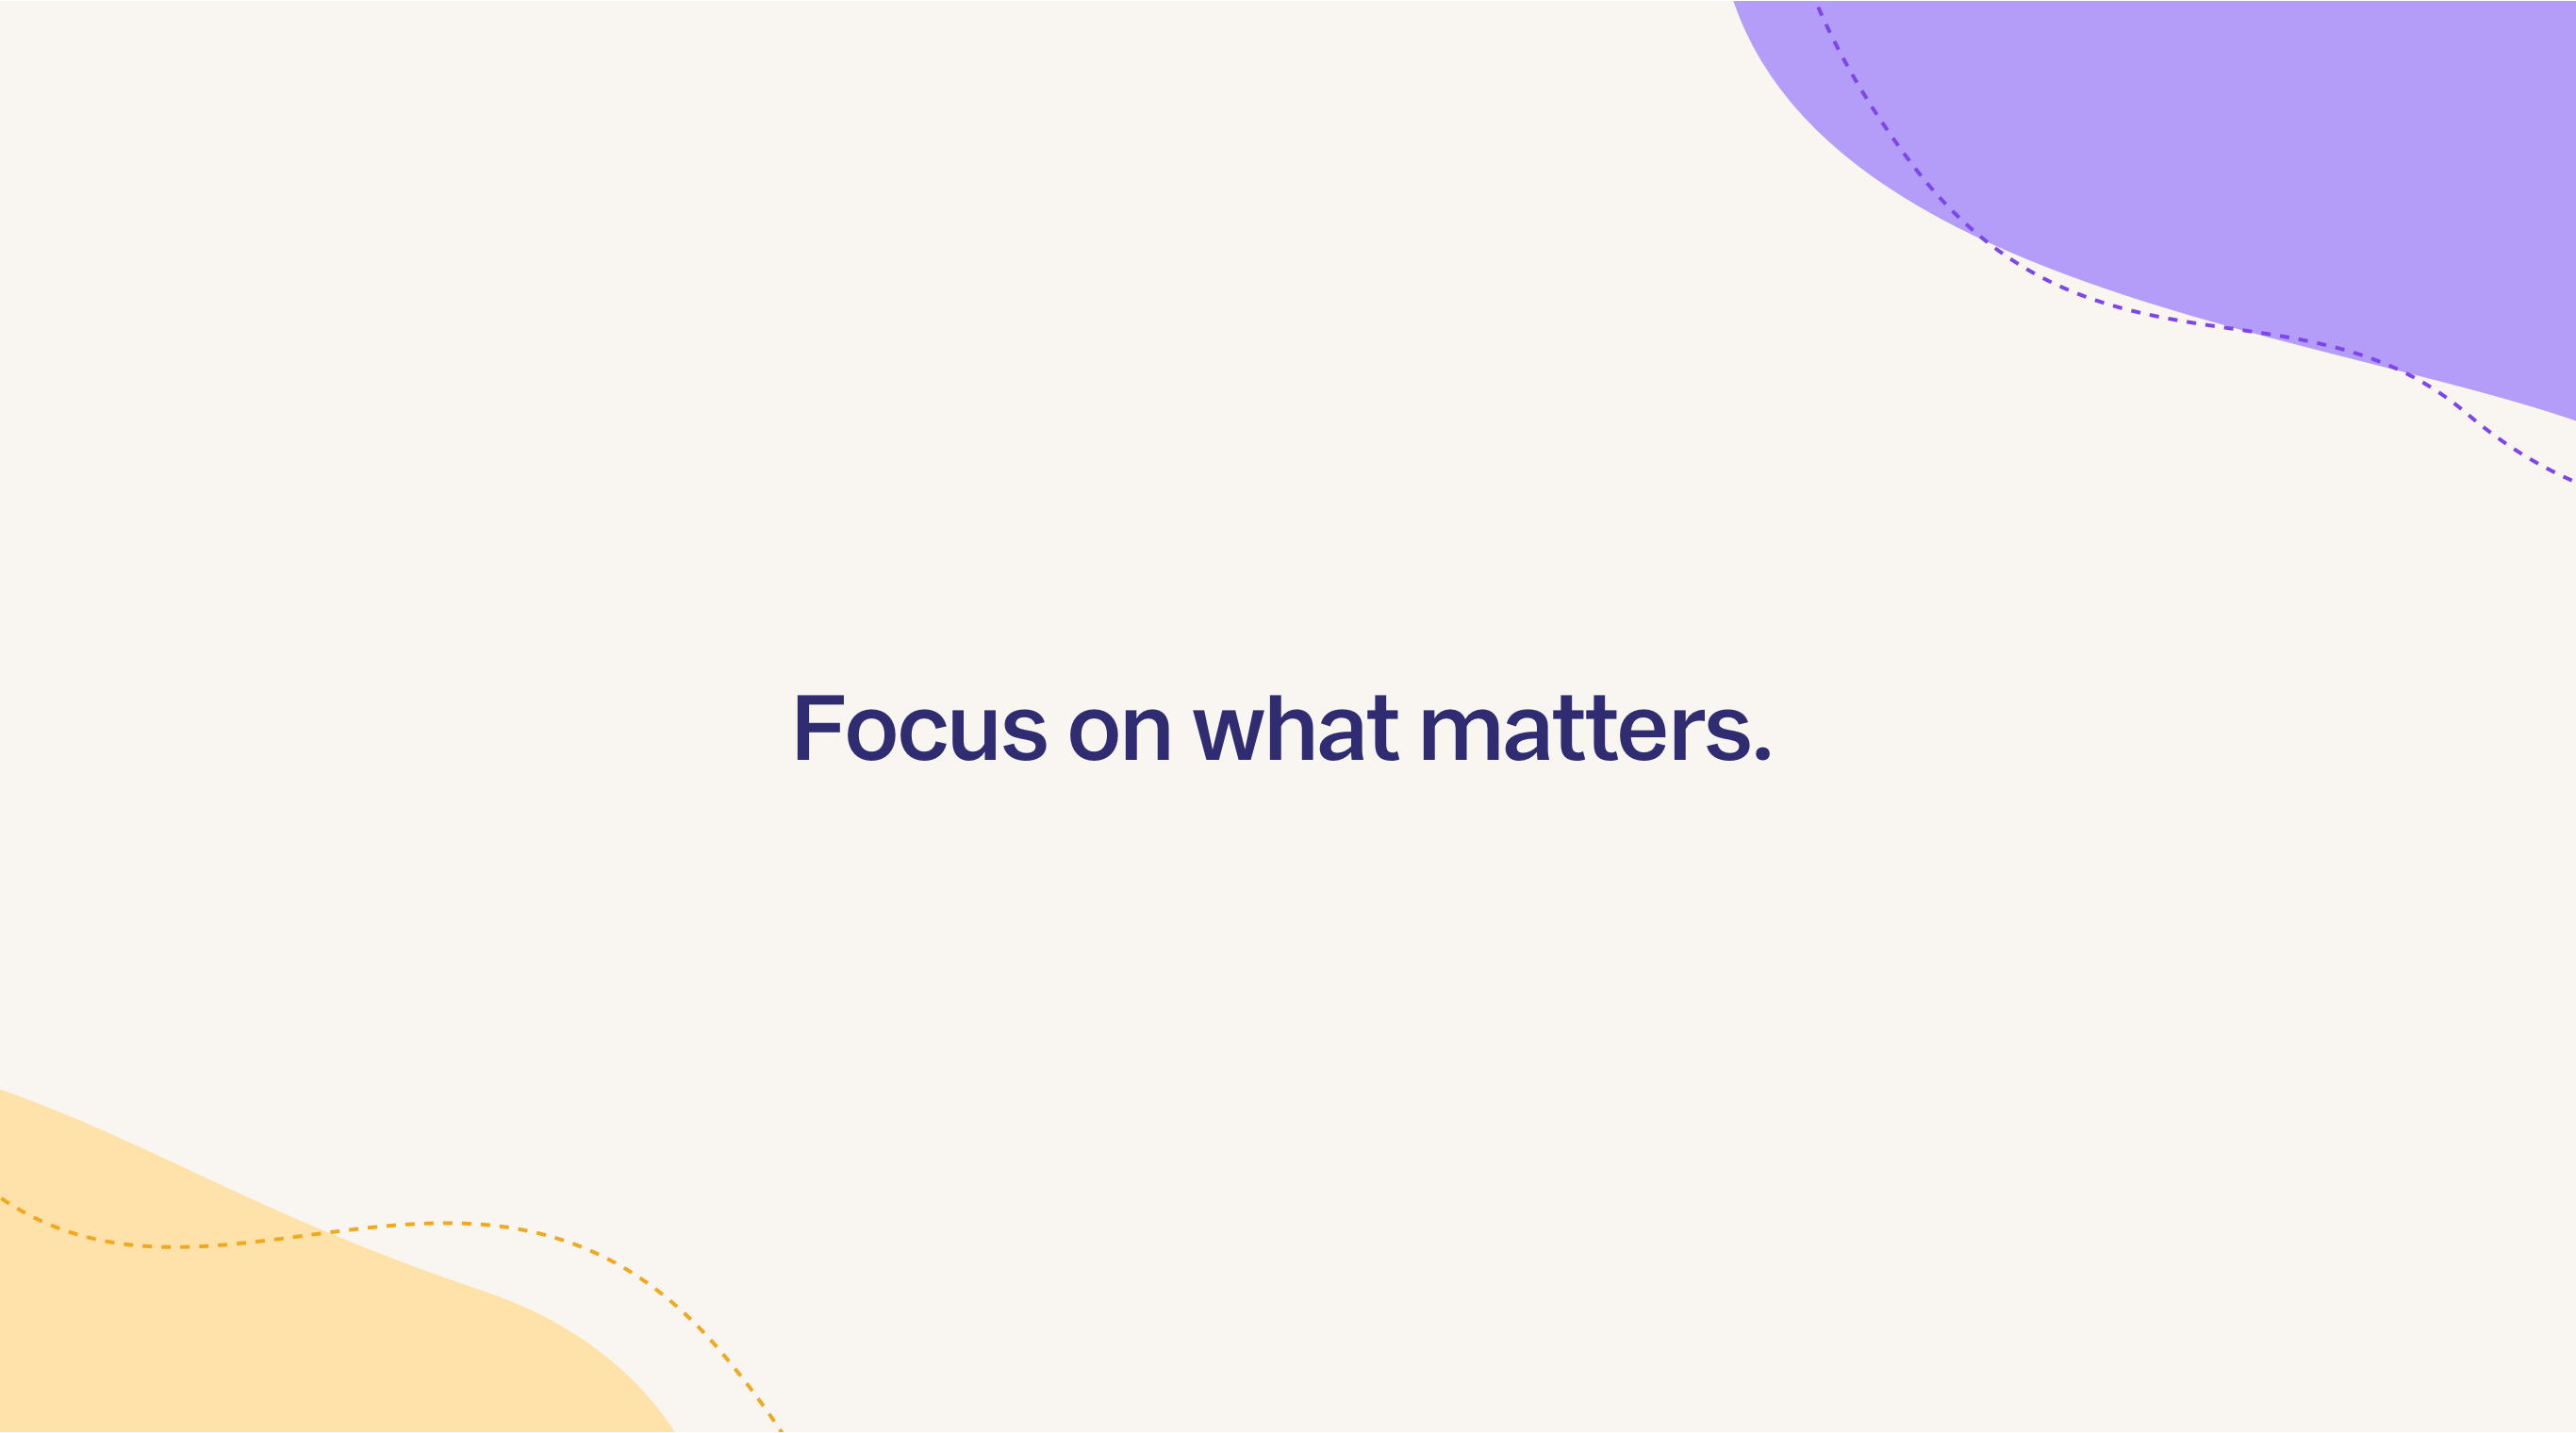 An off-white page tells a user to “Focus on what matters”